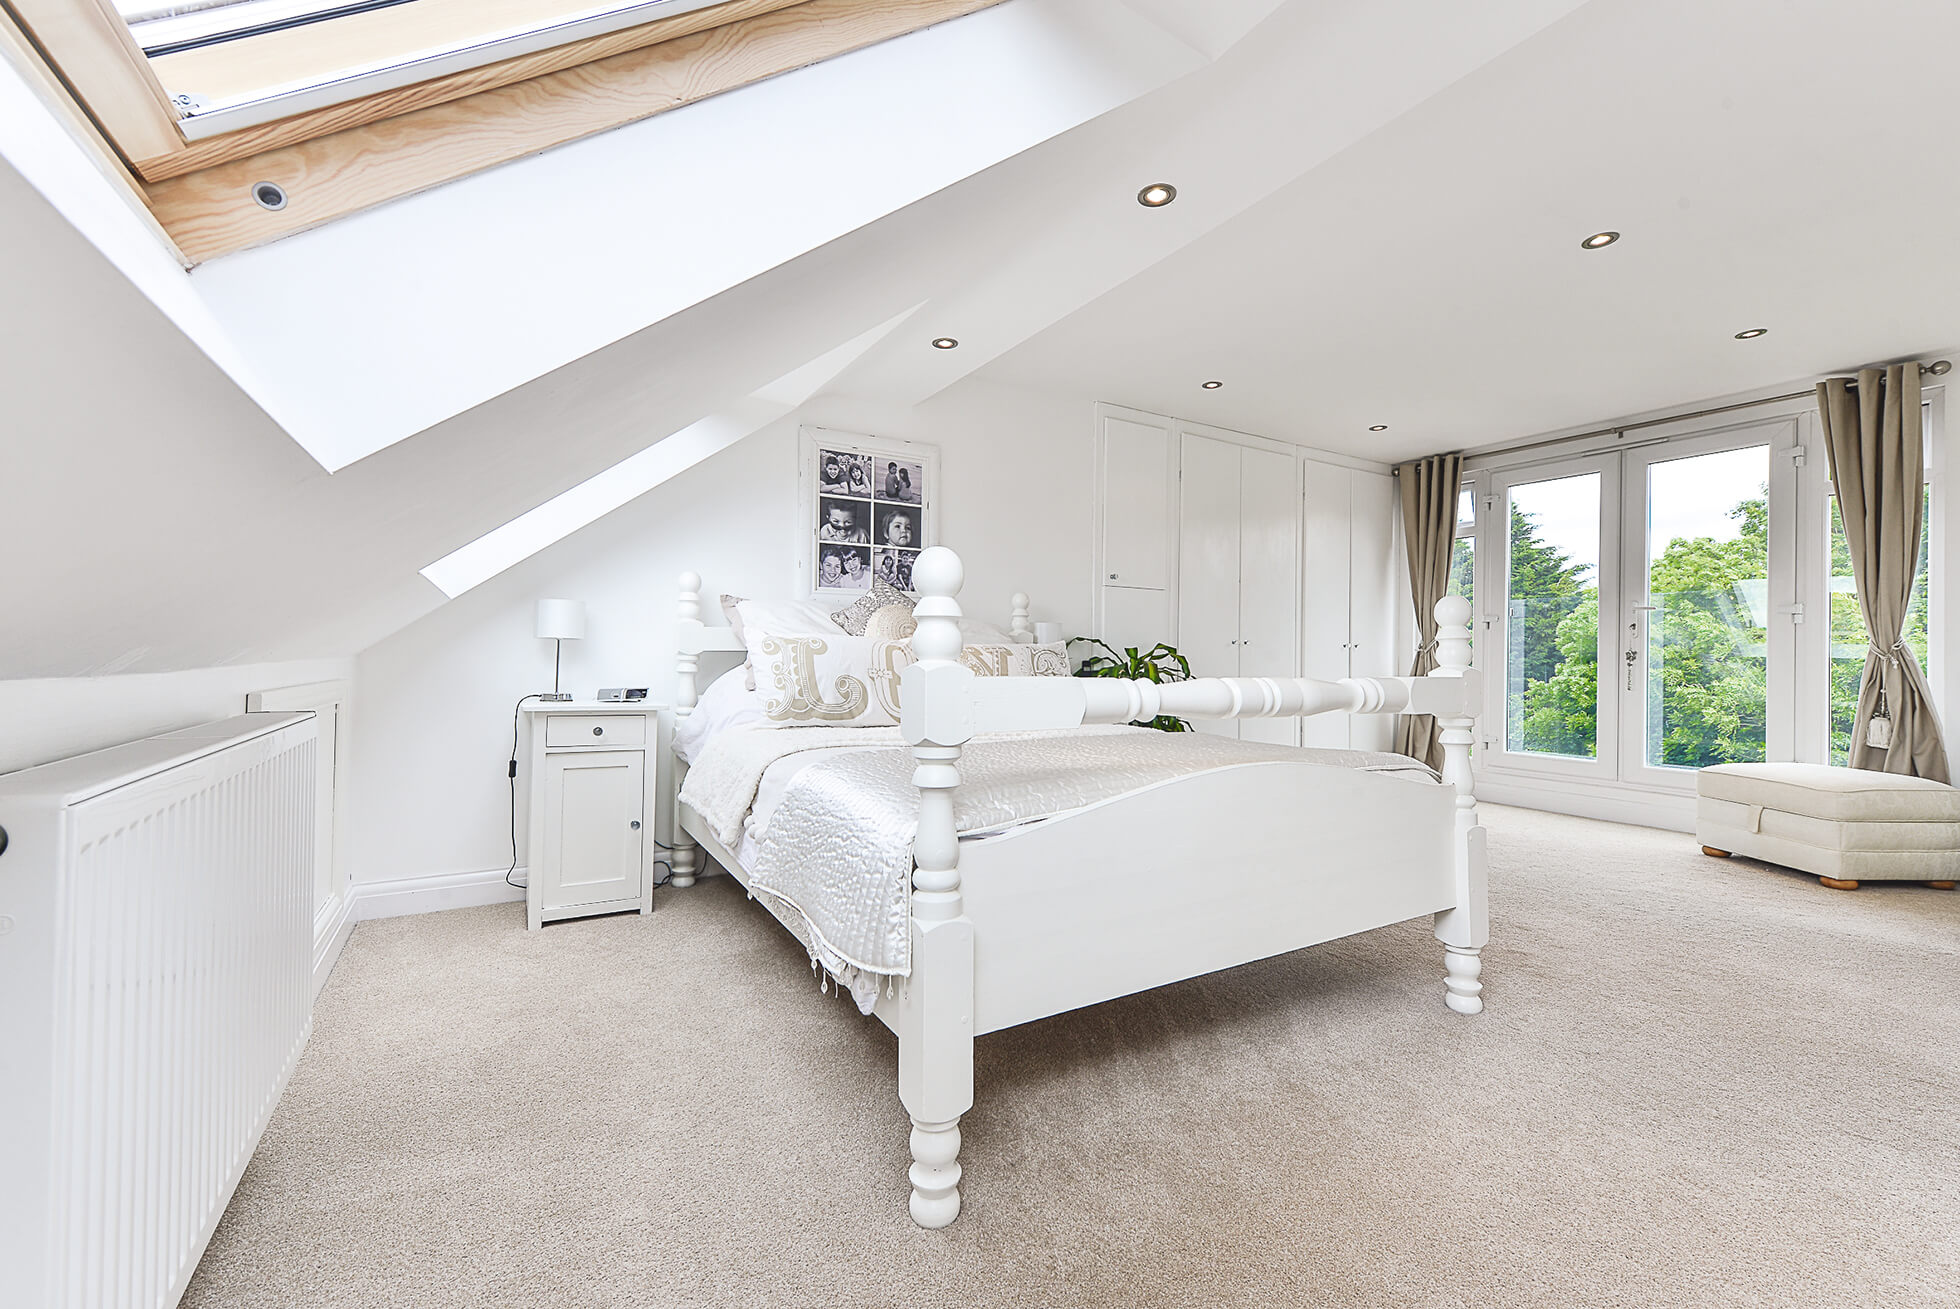 Do you have a question about converting your Loft in Batchworth? Here are the most popular questions asked by our clients.